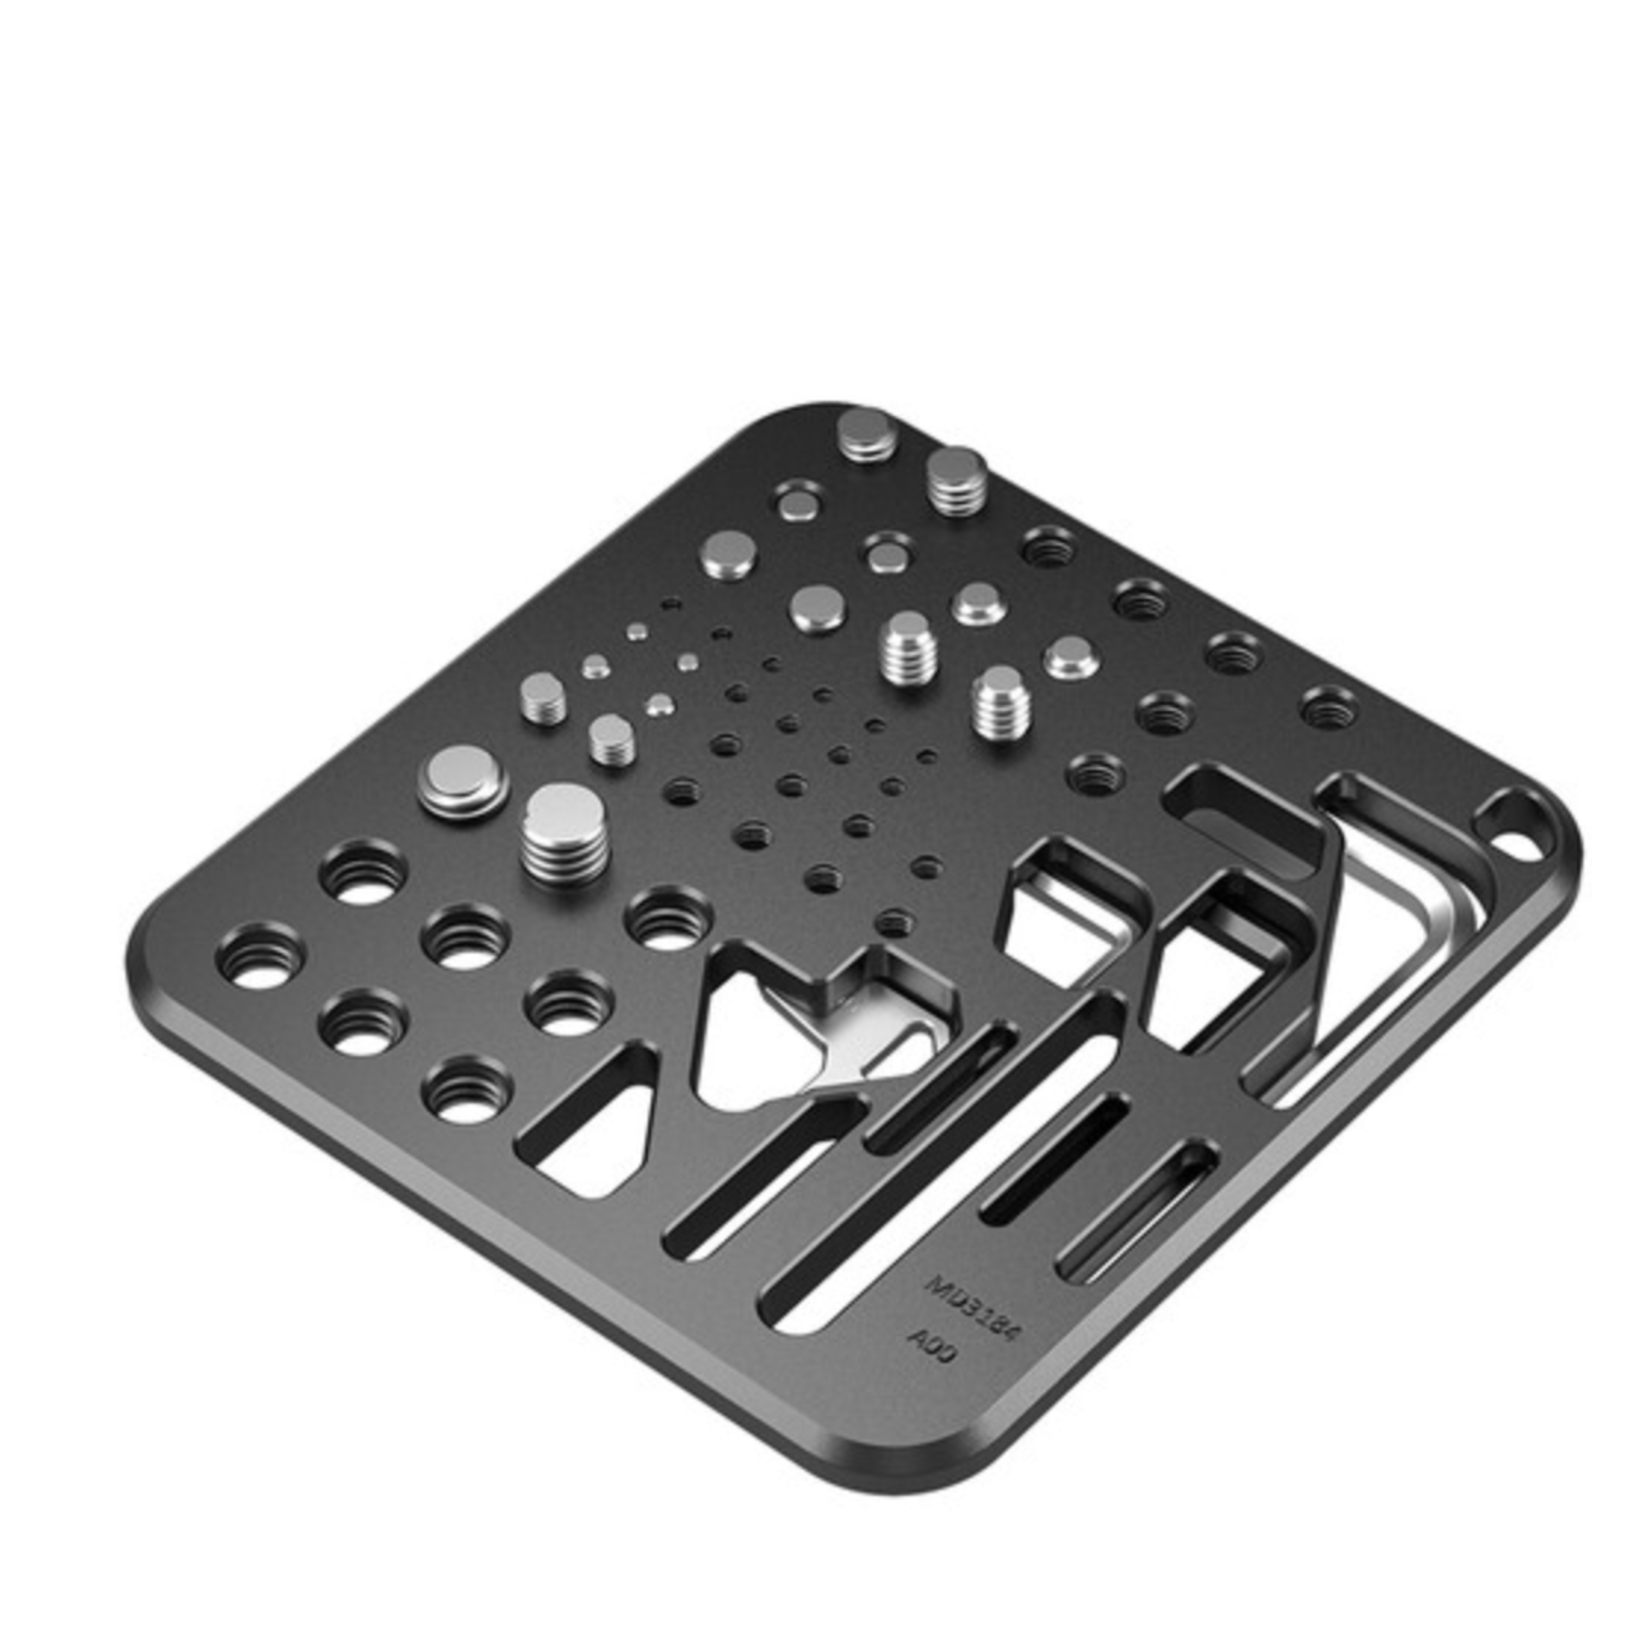 SmallRig SmallRig Screw and Allen Wrench Storage Plate Kit